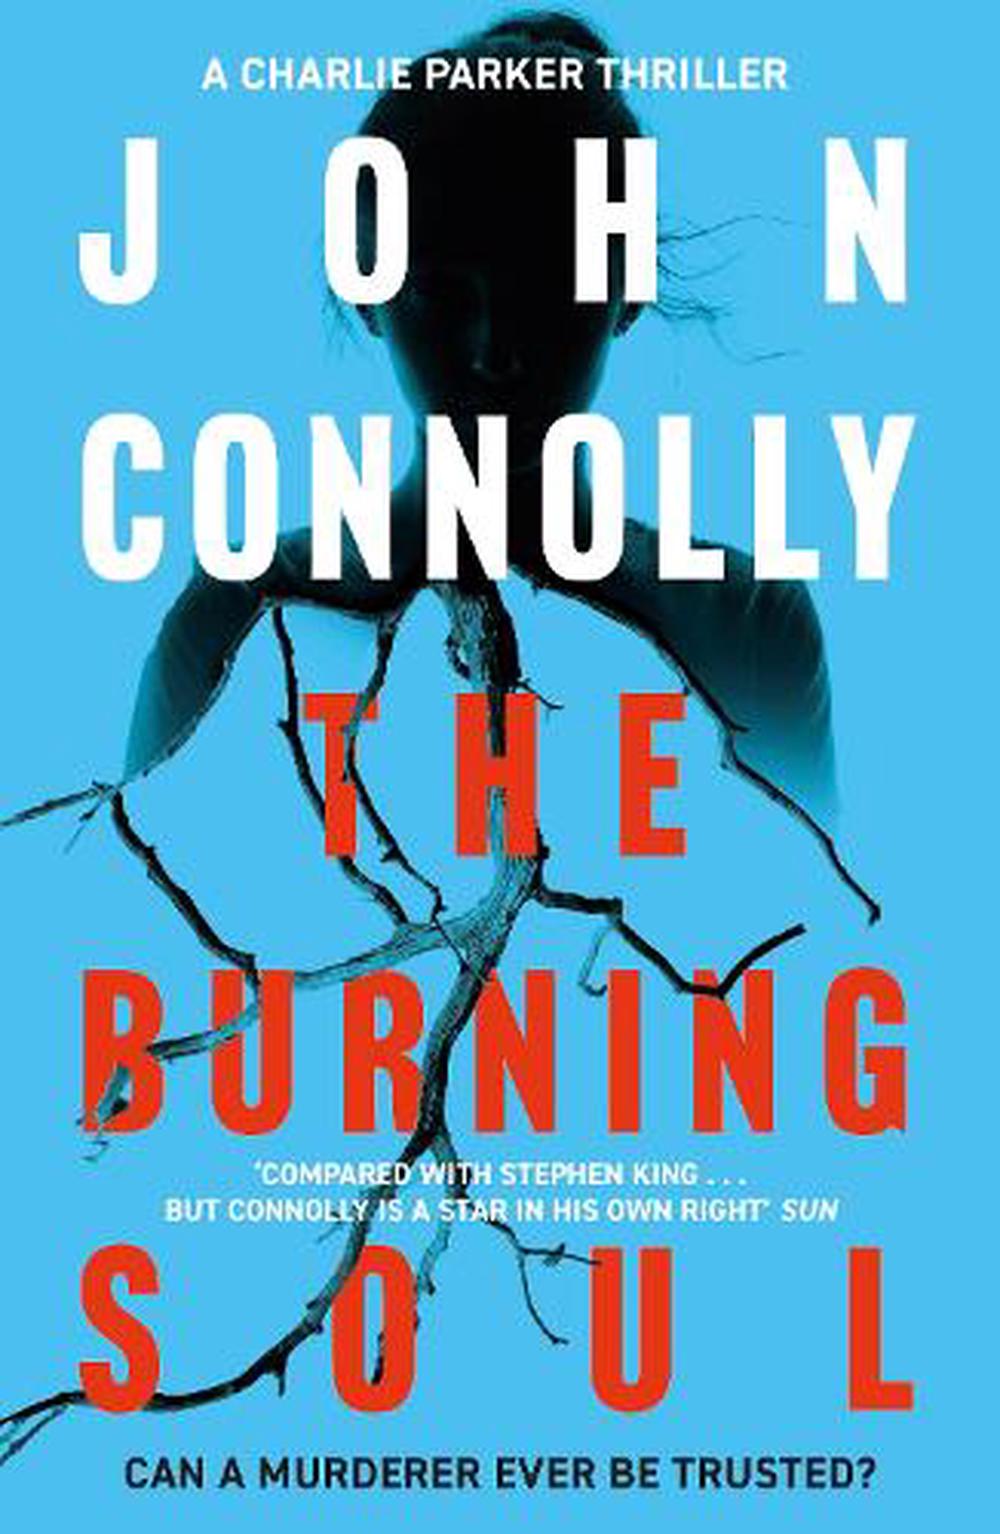 The Burning Soul by John Connolly, Paperback, 9780340993552 Buy